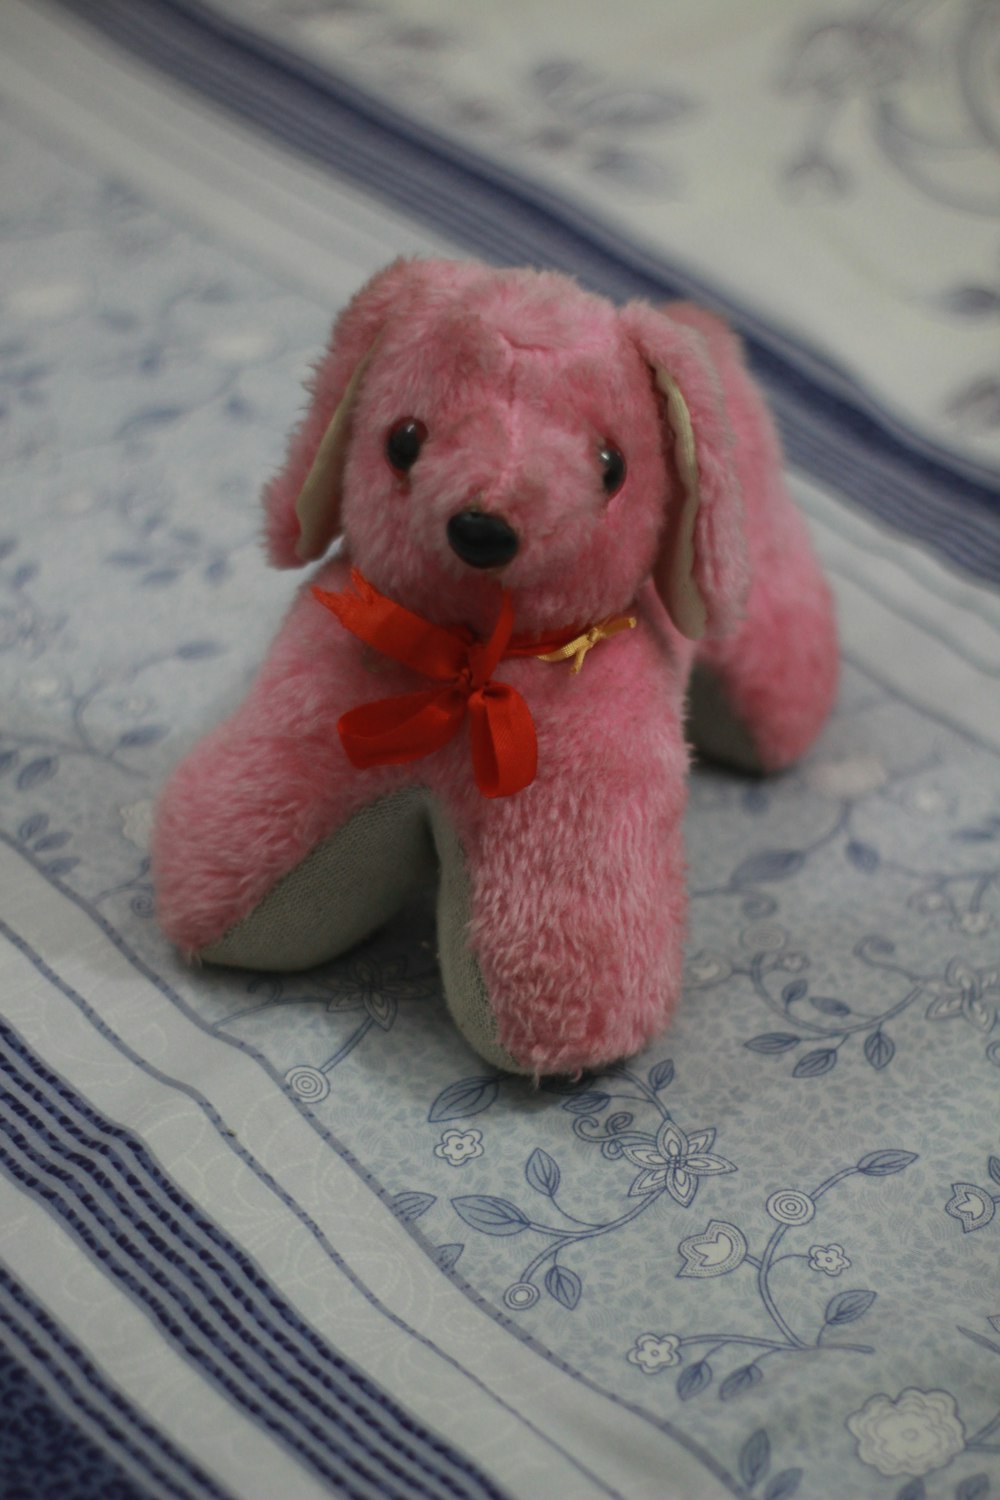 pink bear plush toy on white and blue textile